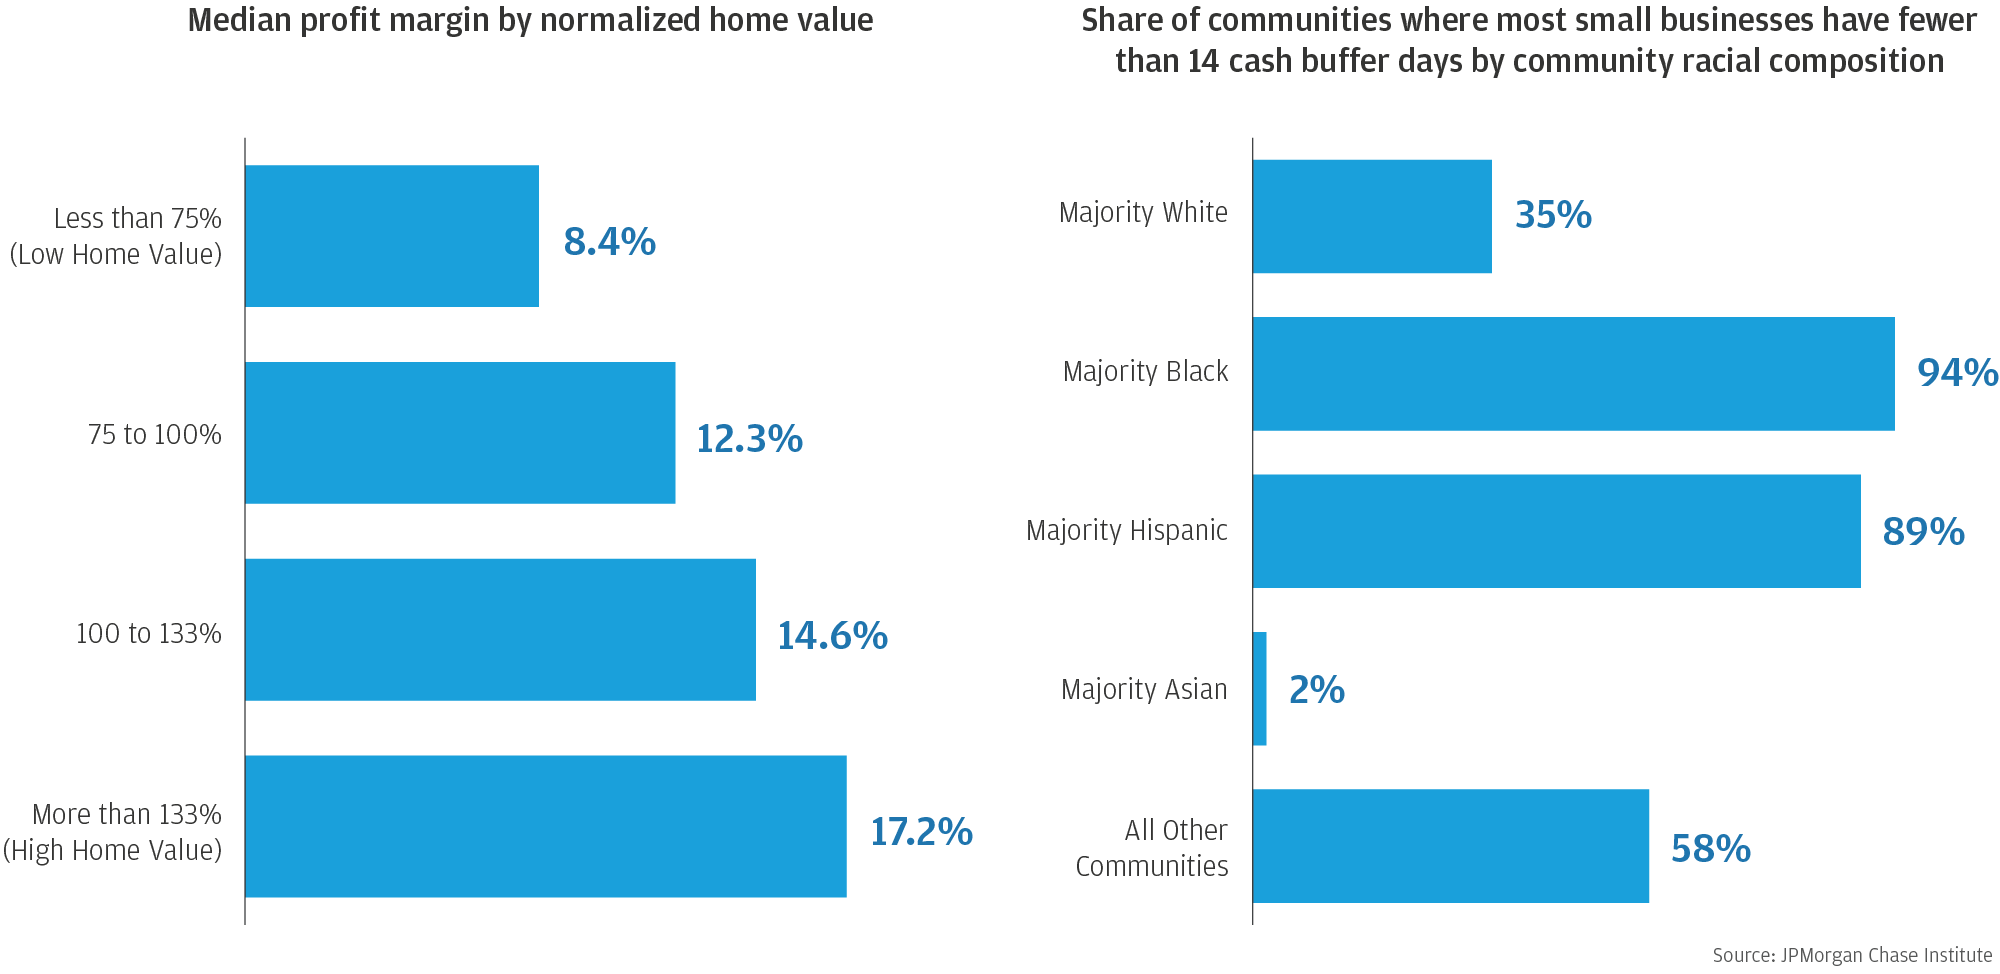 Bar graph-1 showing median profit margin by normalized home value and Bar graph-2 showing  share of communities where most small businesses have fewer than 14 cash buffer days by community racial composition